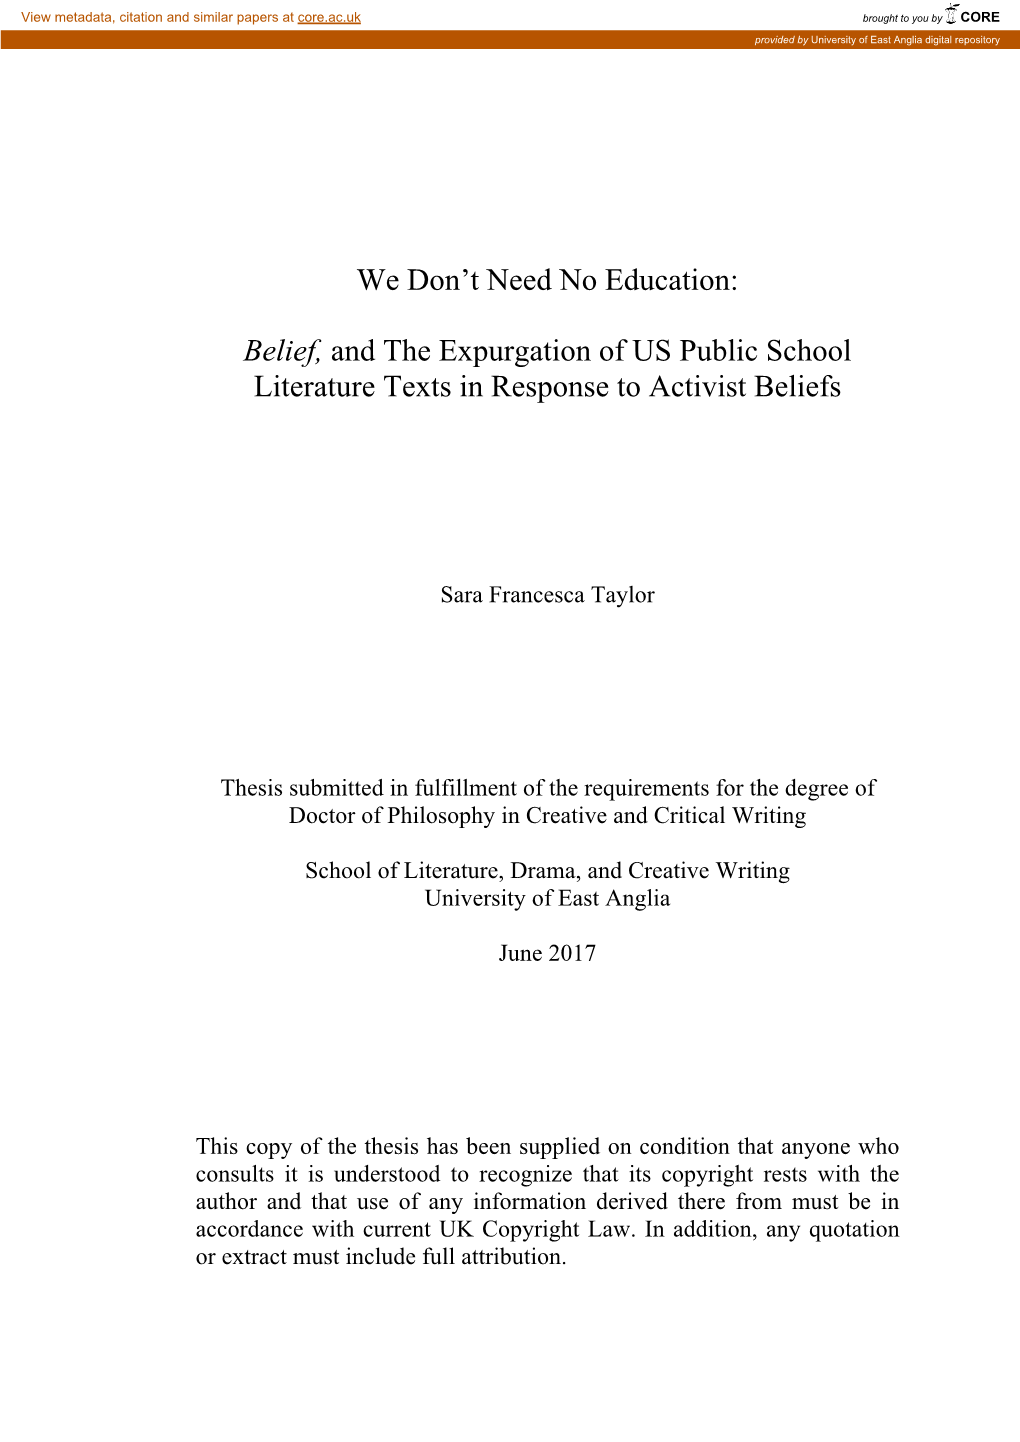 Belief, and the Expurgation of US Public School Literature Texts in Response to Activist Beliefs